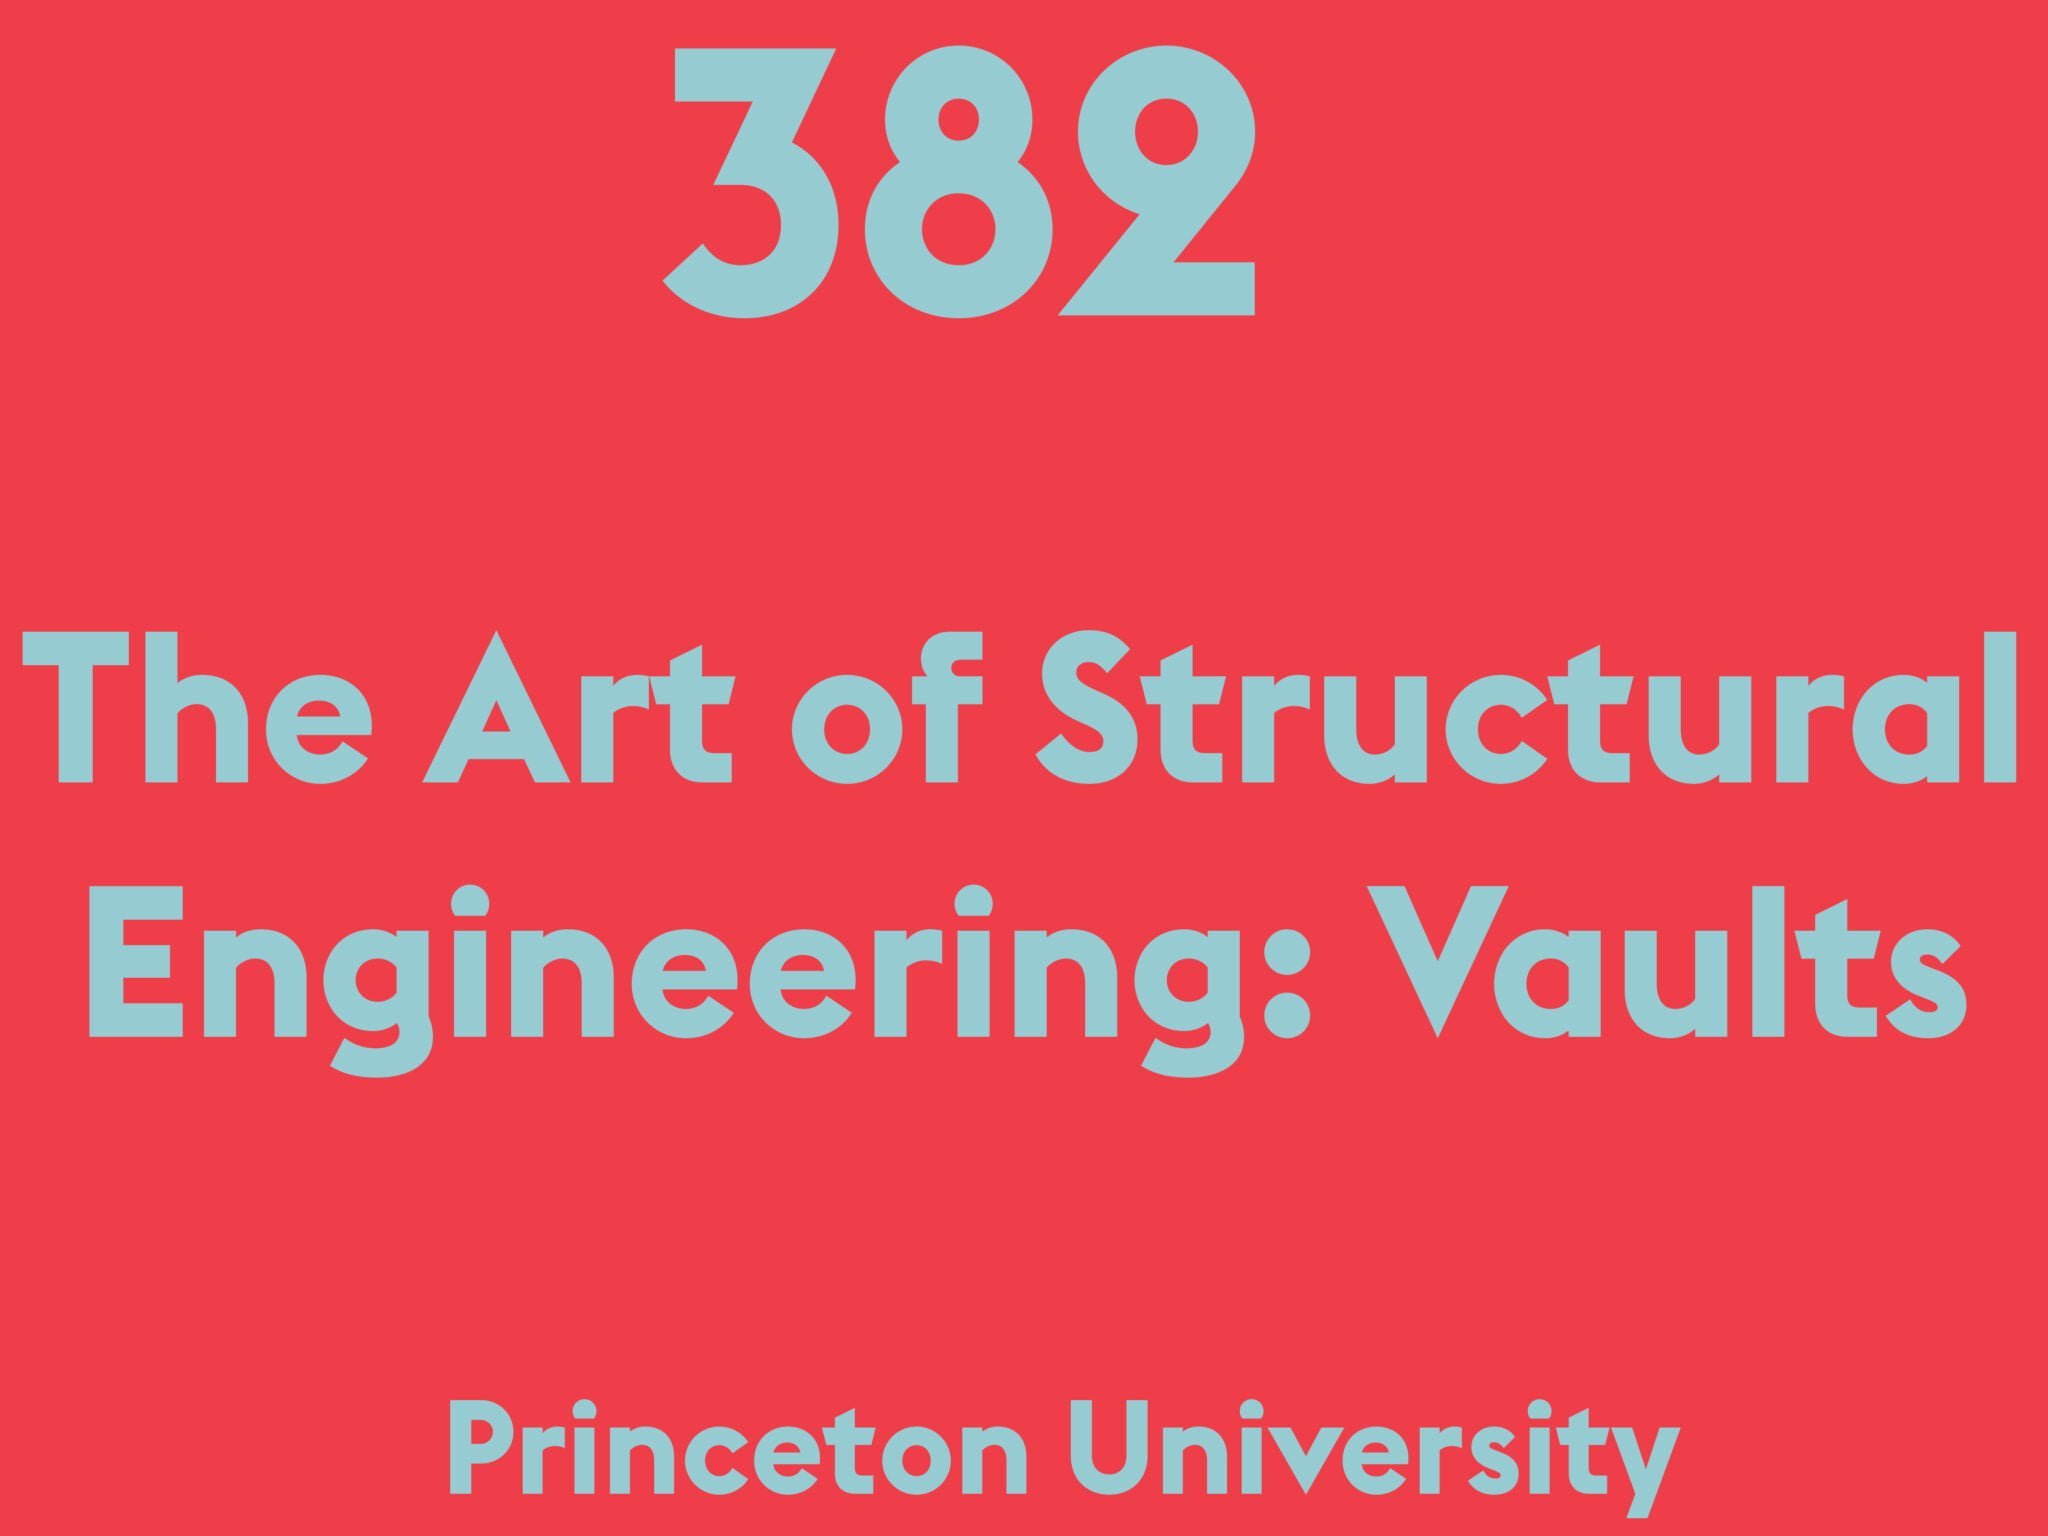 The Art of Structural Engineering: Vaults